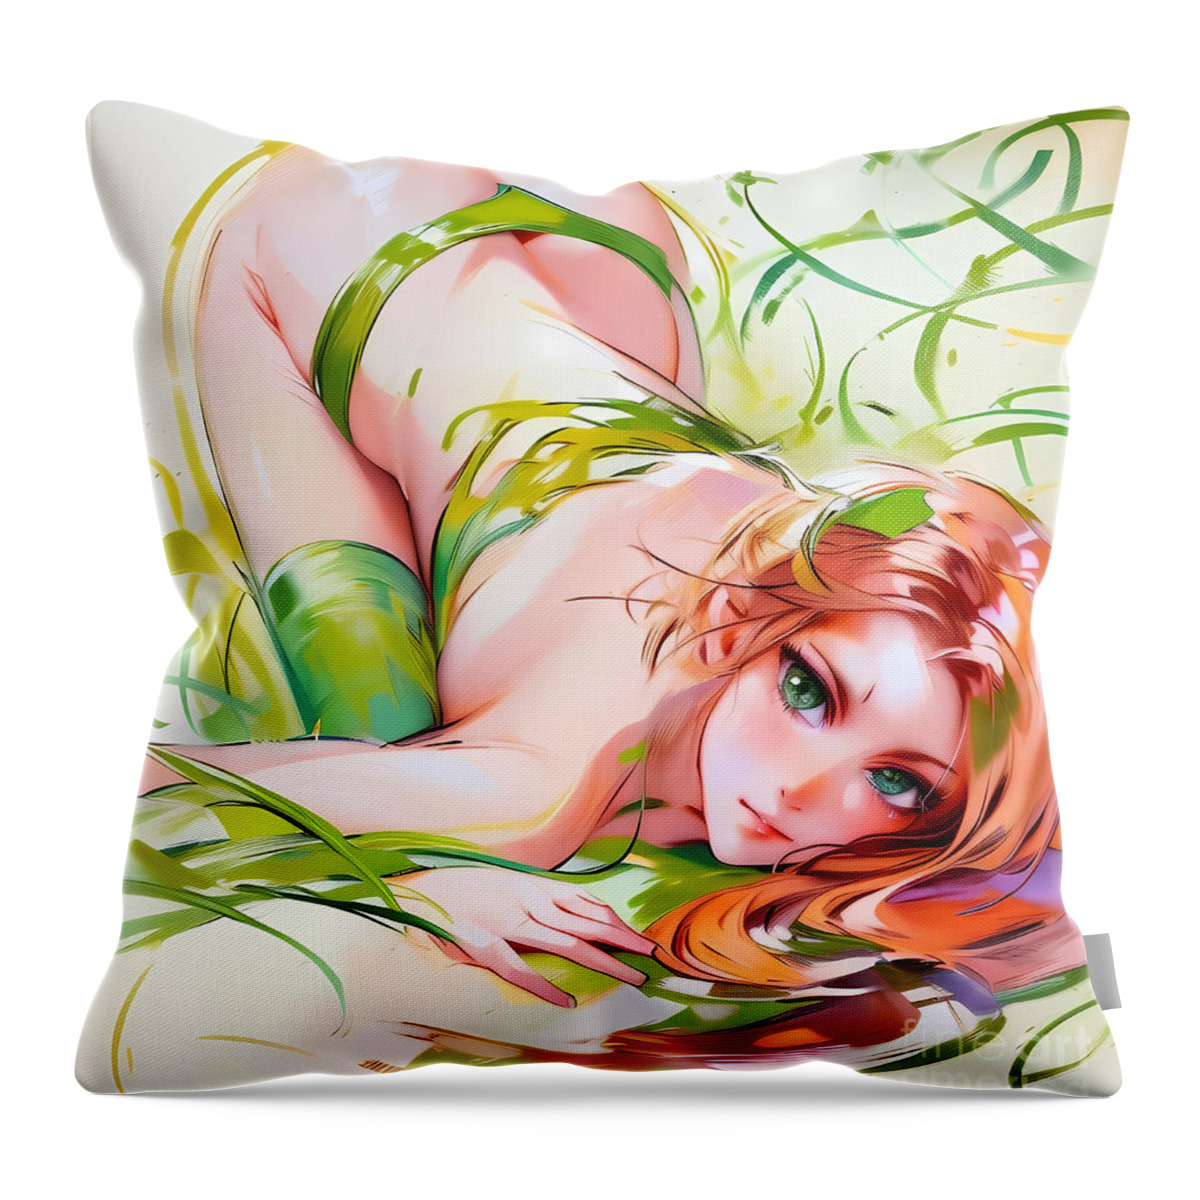 Poison Throw Pillow featuring the digital art Poison Ivy - Enhanced 1 by Bill Richards